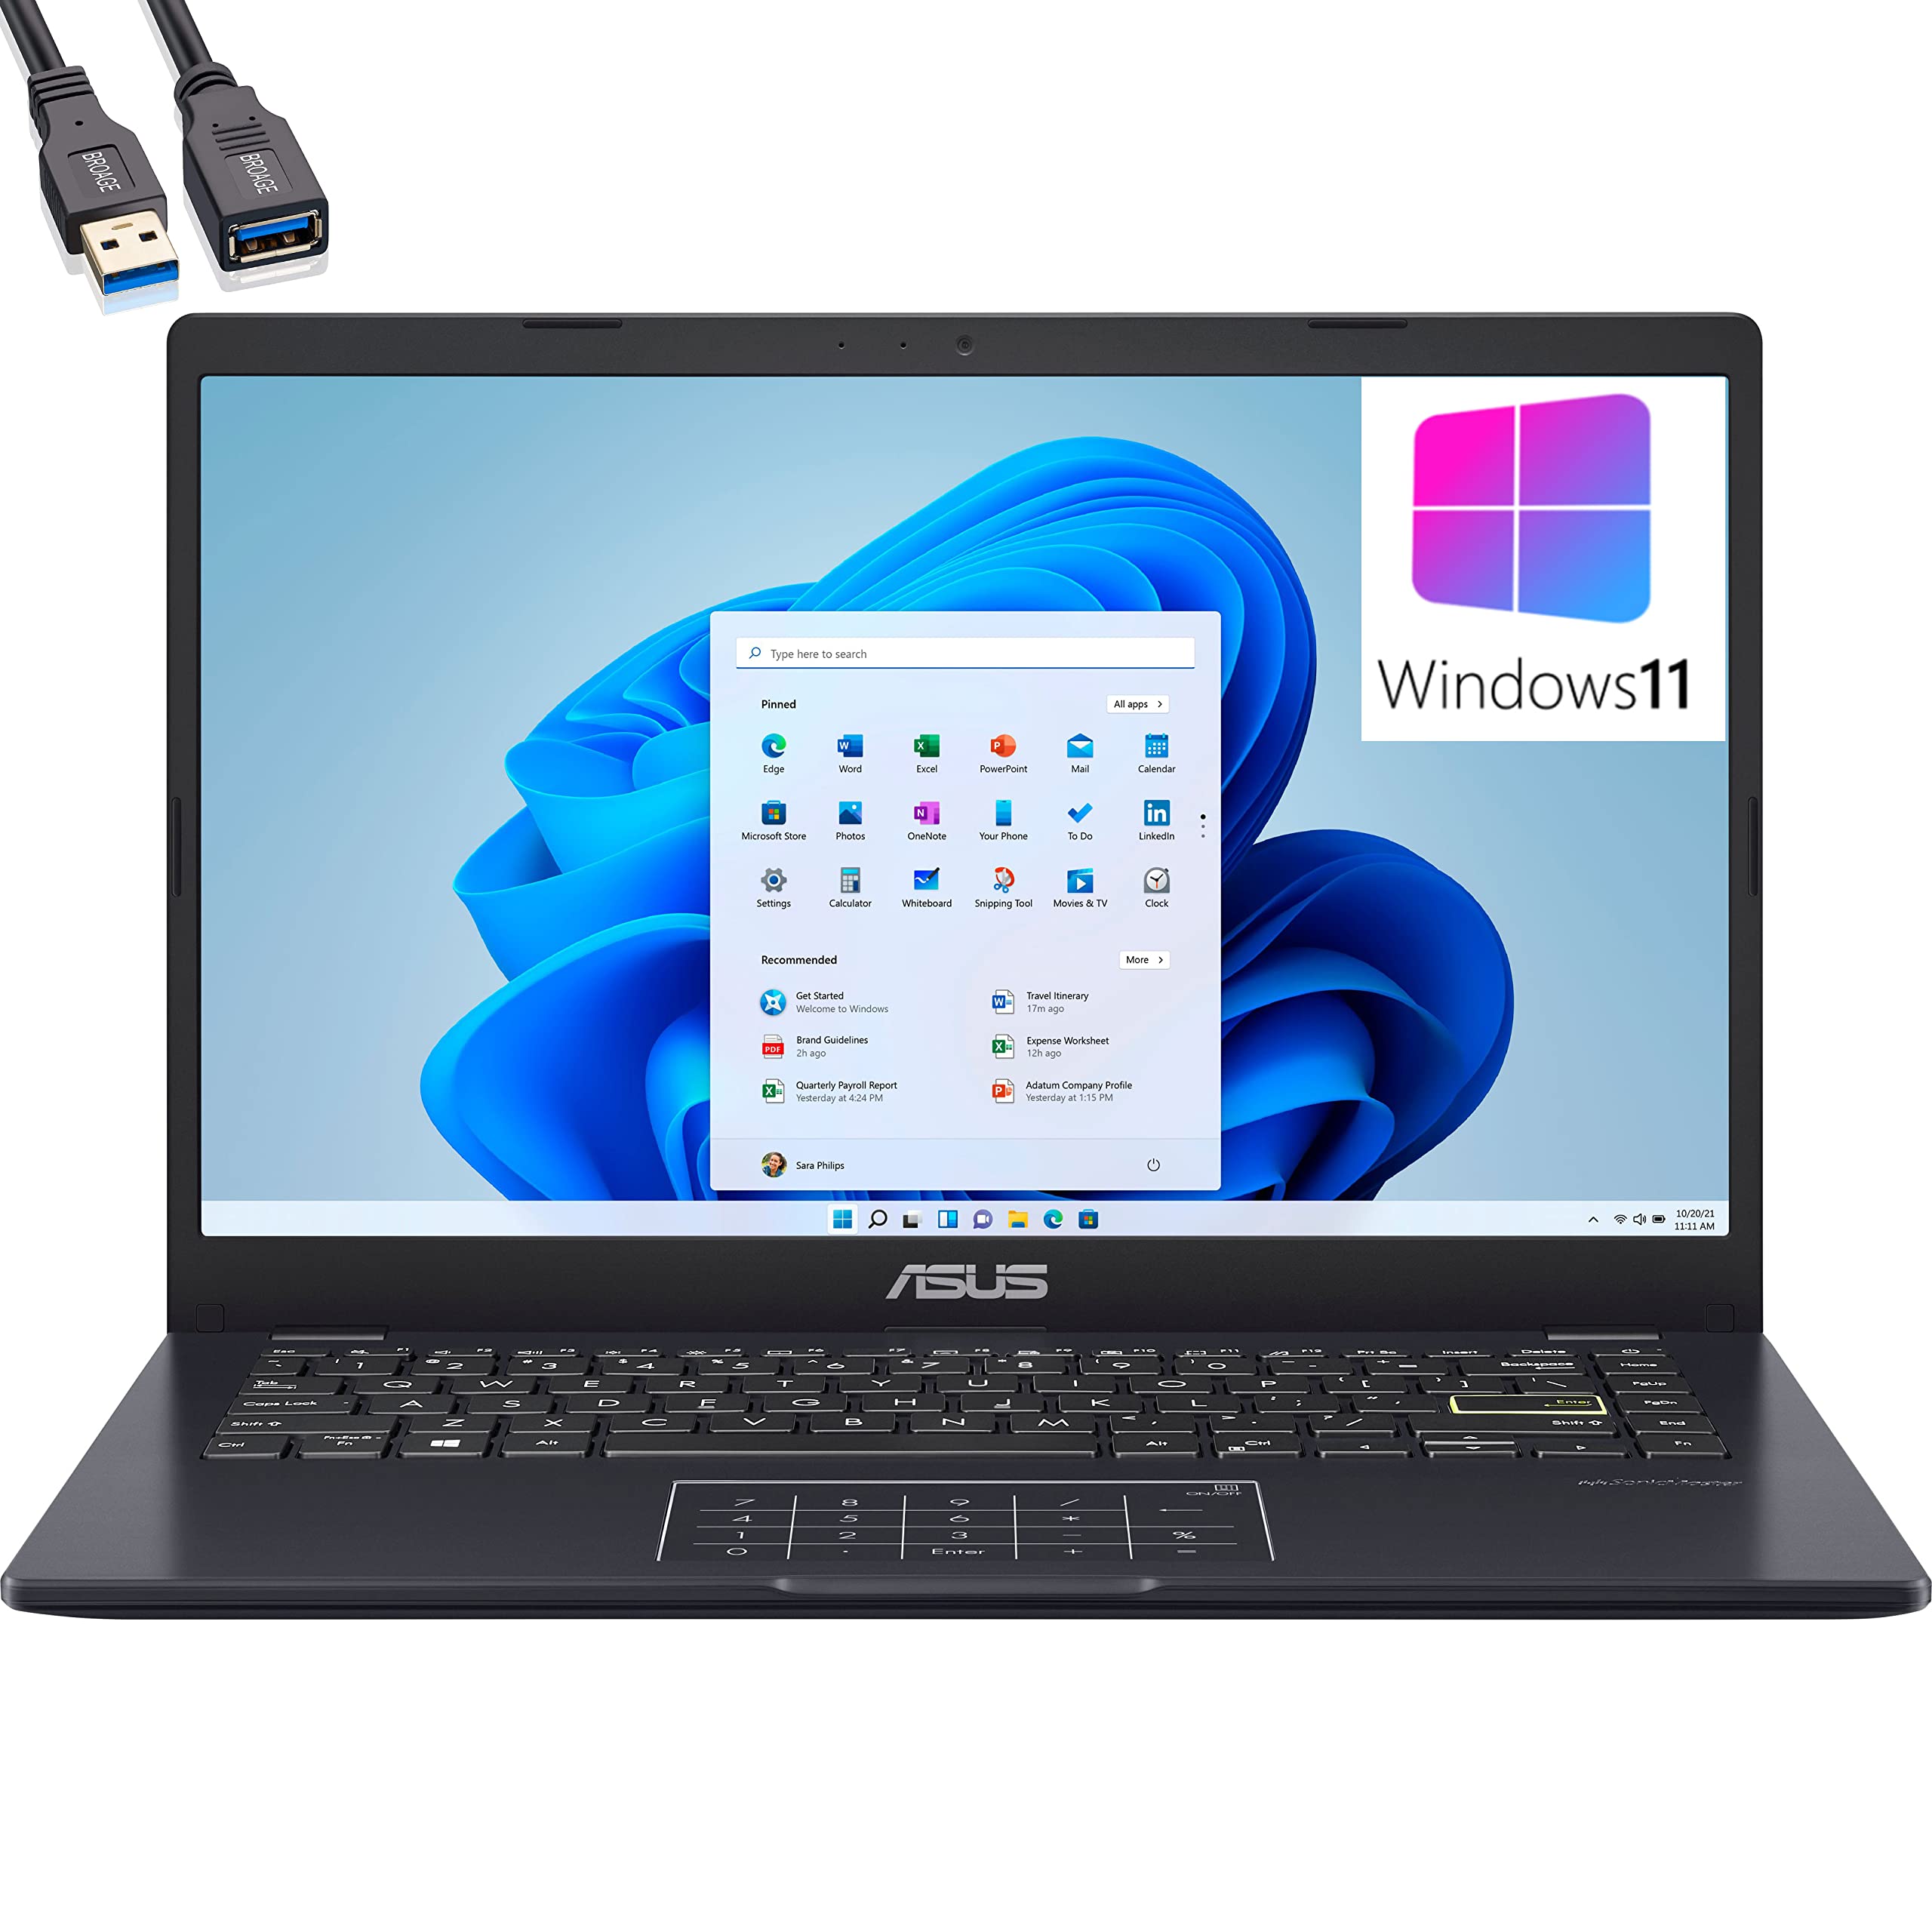 ASUS laptop with multiple application icons.